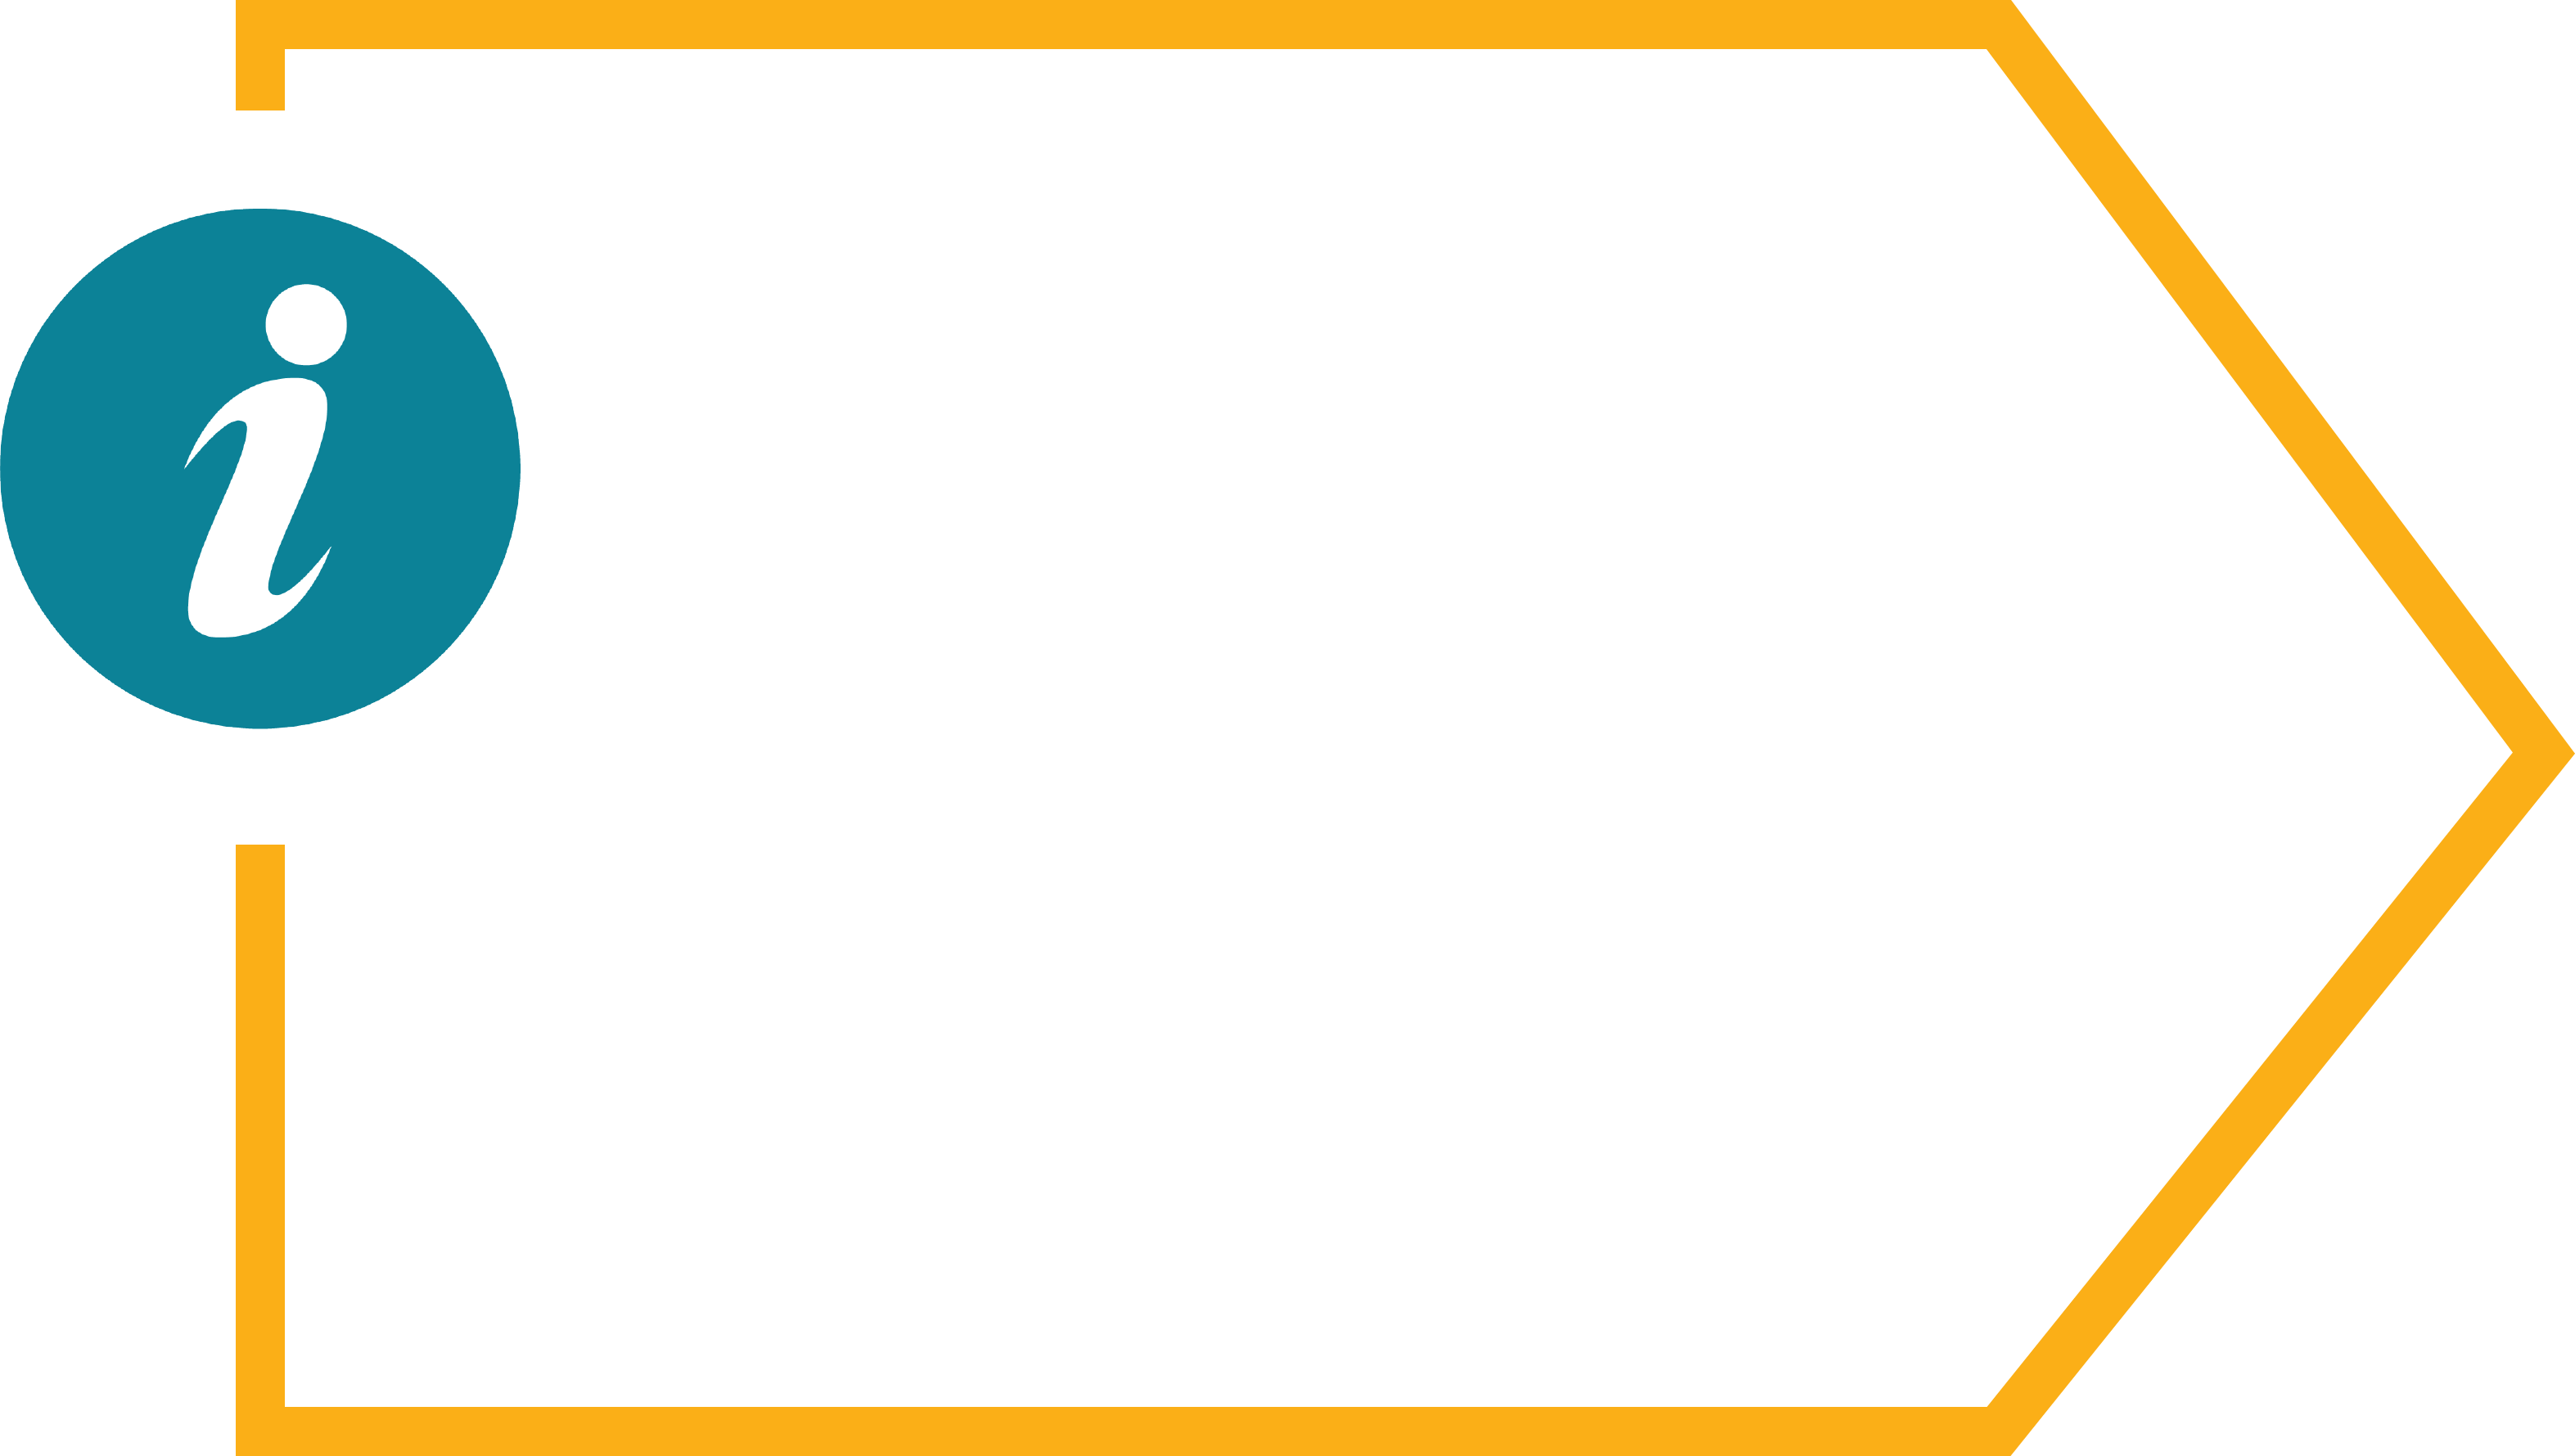 More than 90% of new family doctors don't feel prepared for the business side of family practice. Source: 2016 First Five Years Needs Assessment Survey